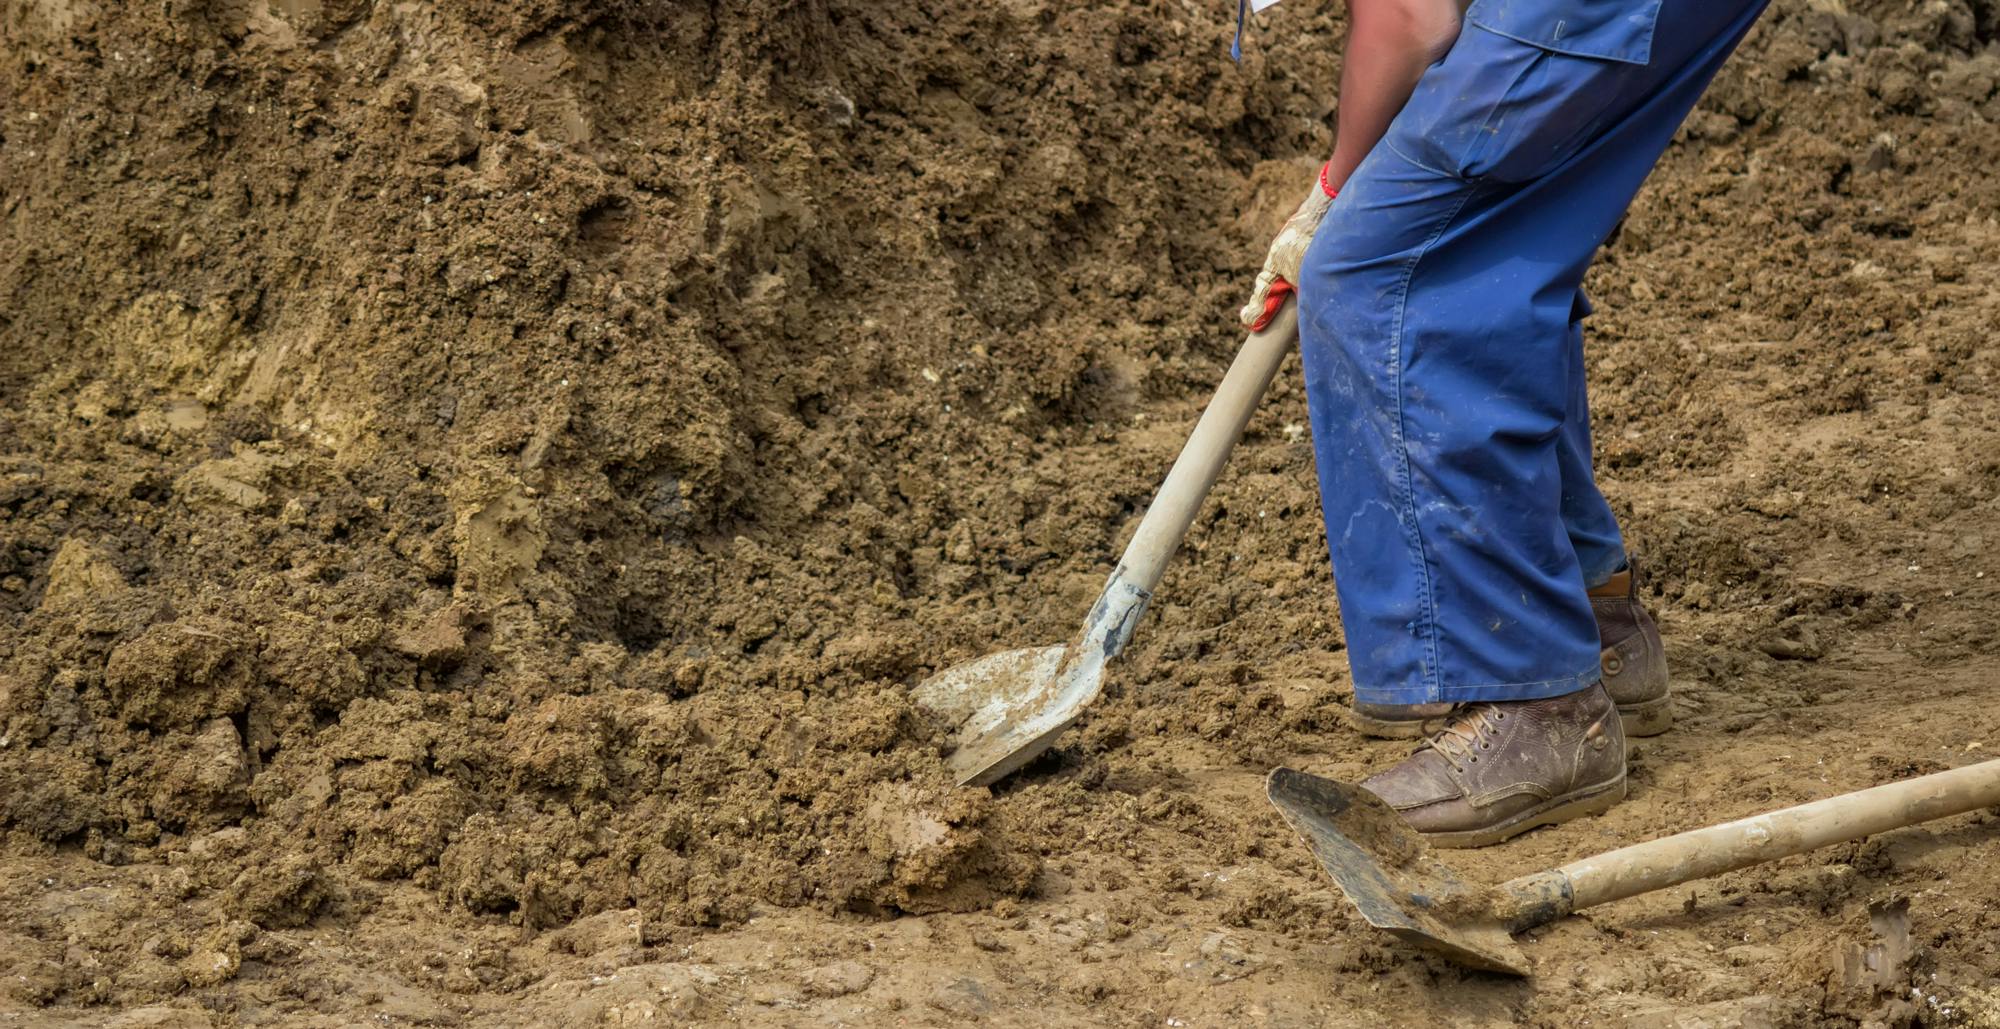 Can You Dig It? How to Find Free Dirt Near You